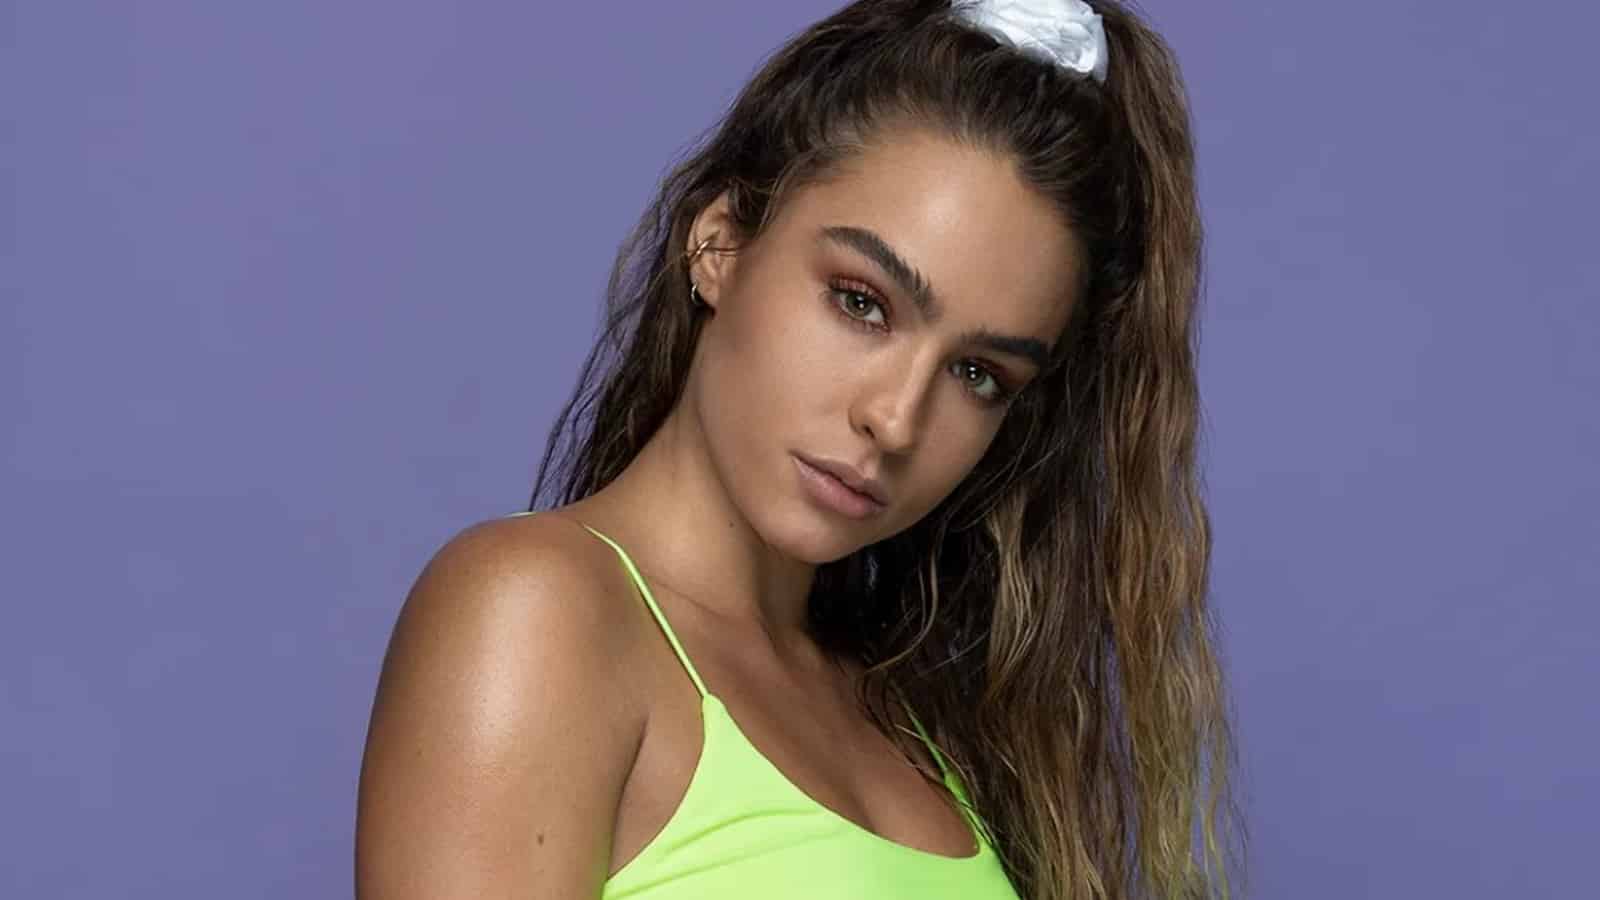 an image of sommer ray on youtube